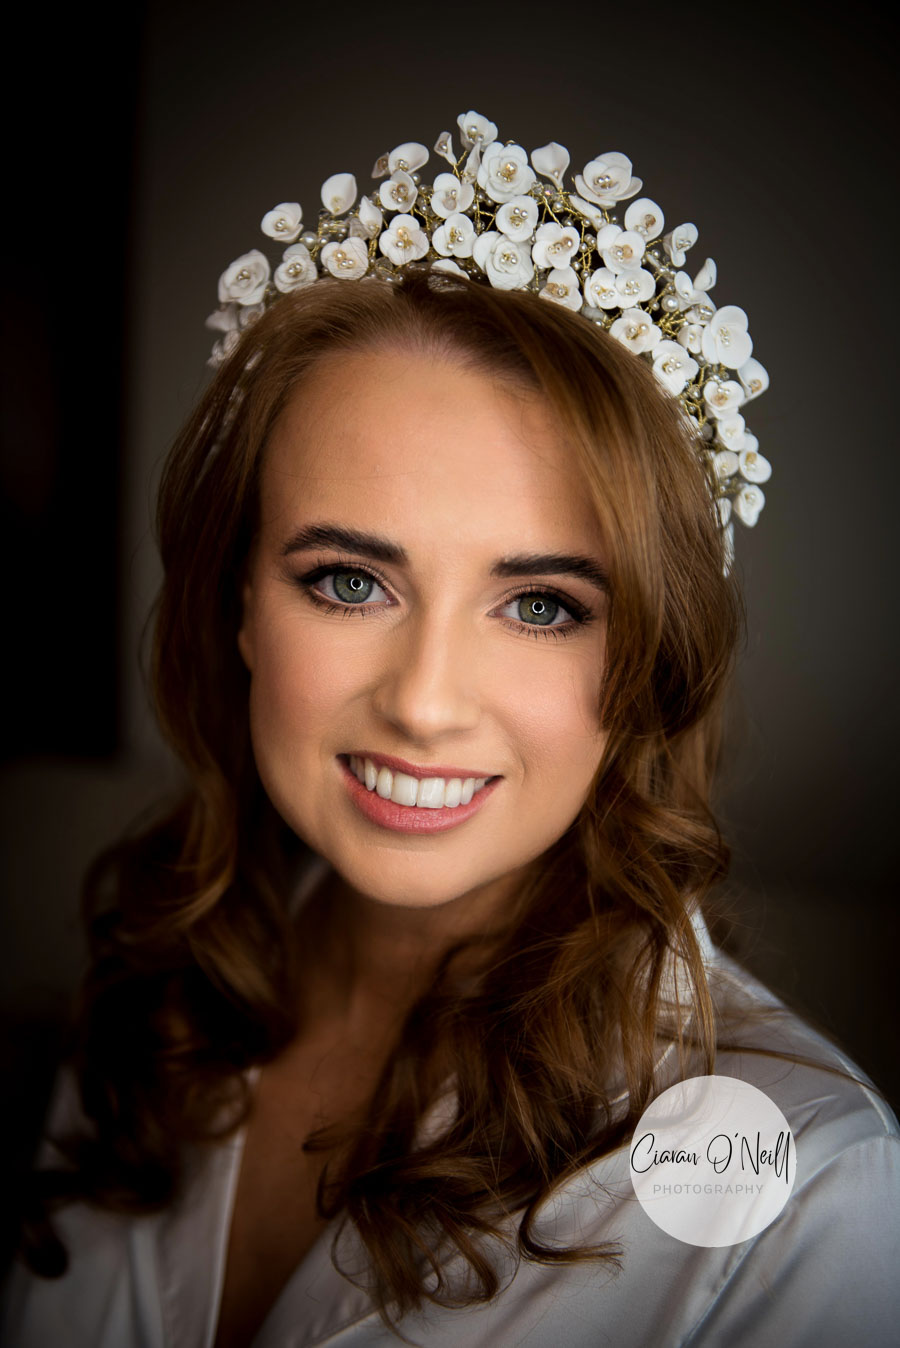 Classic portrait of our stunning bride